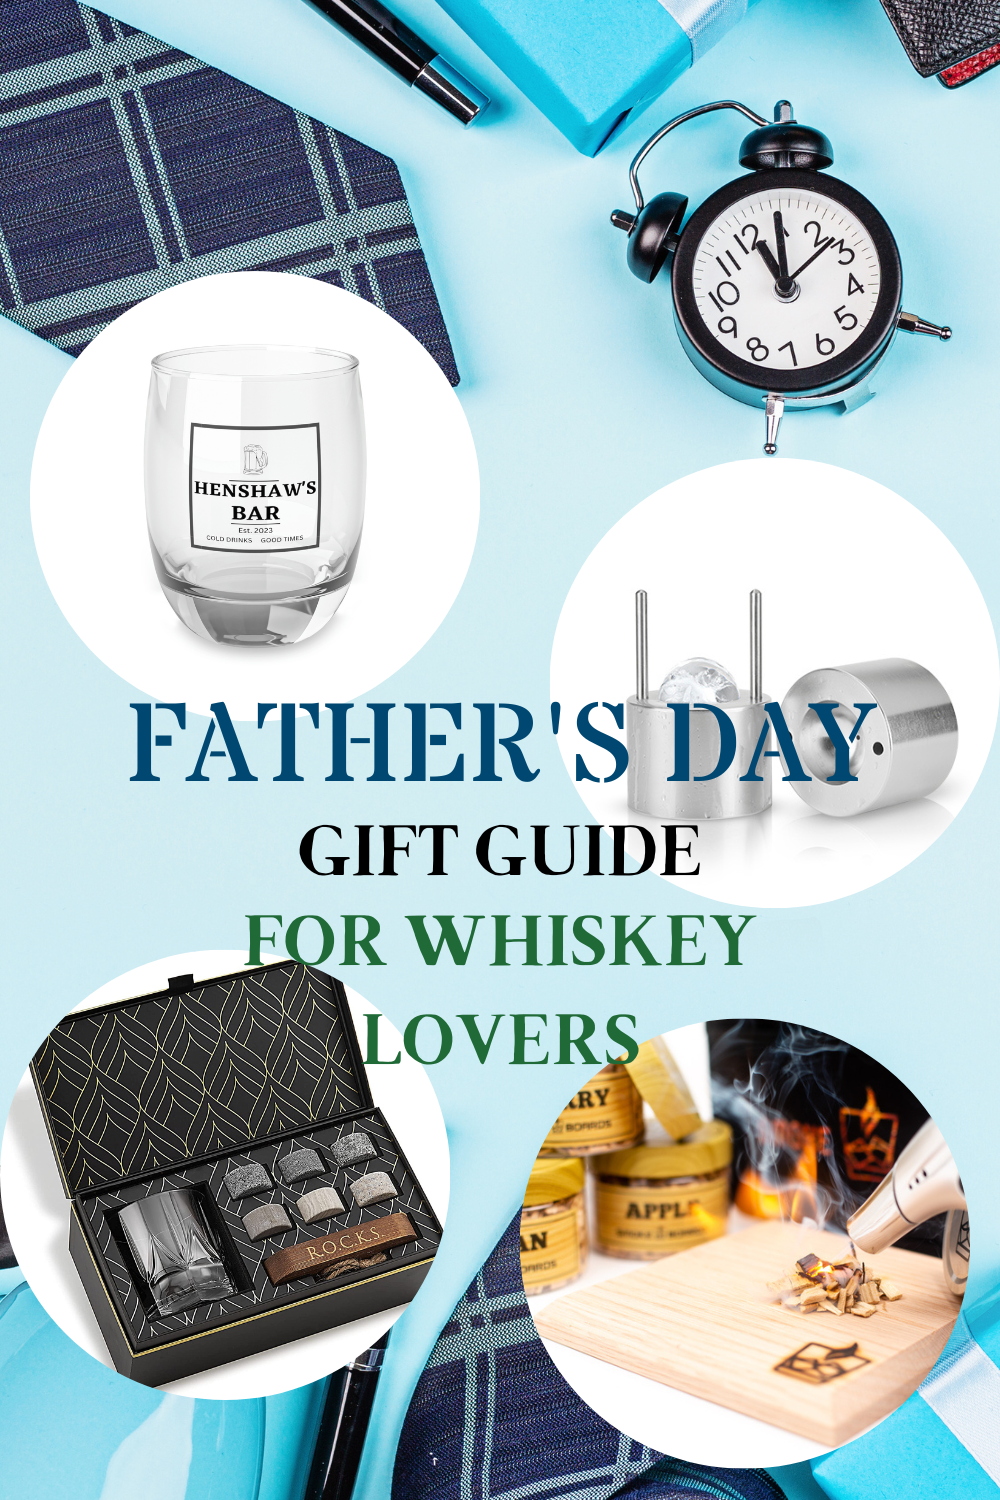 Father's Day Gift Guide for Whiskey Lovers